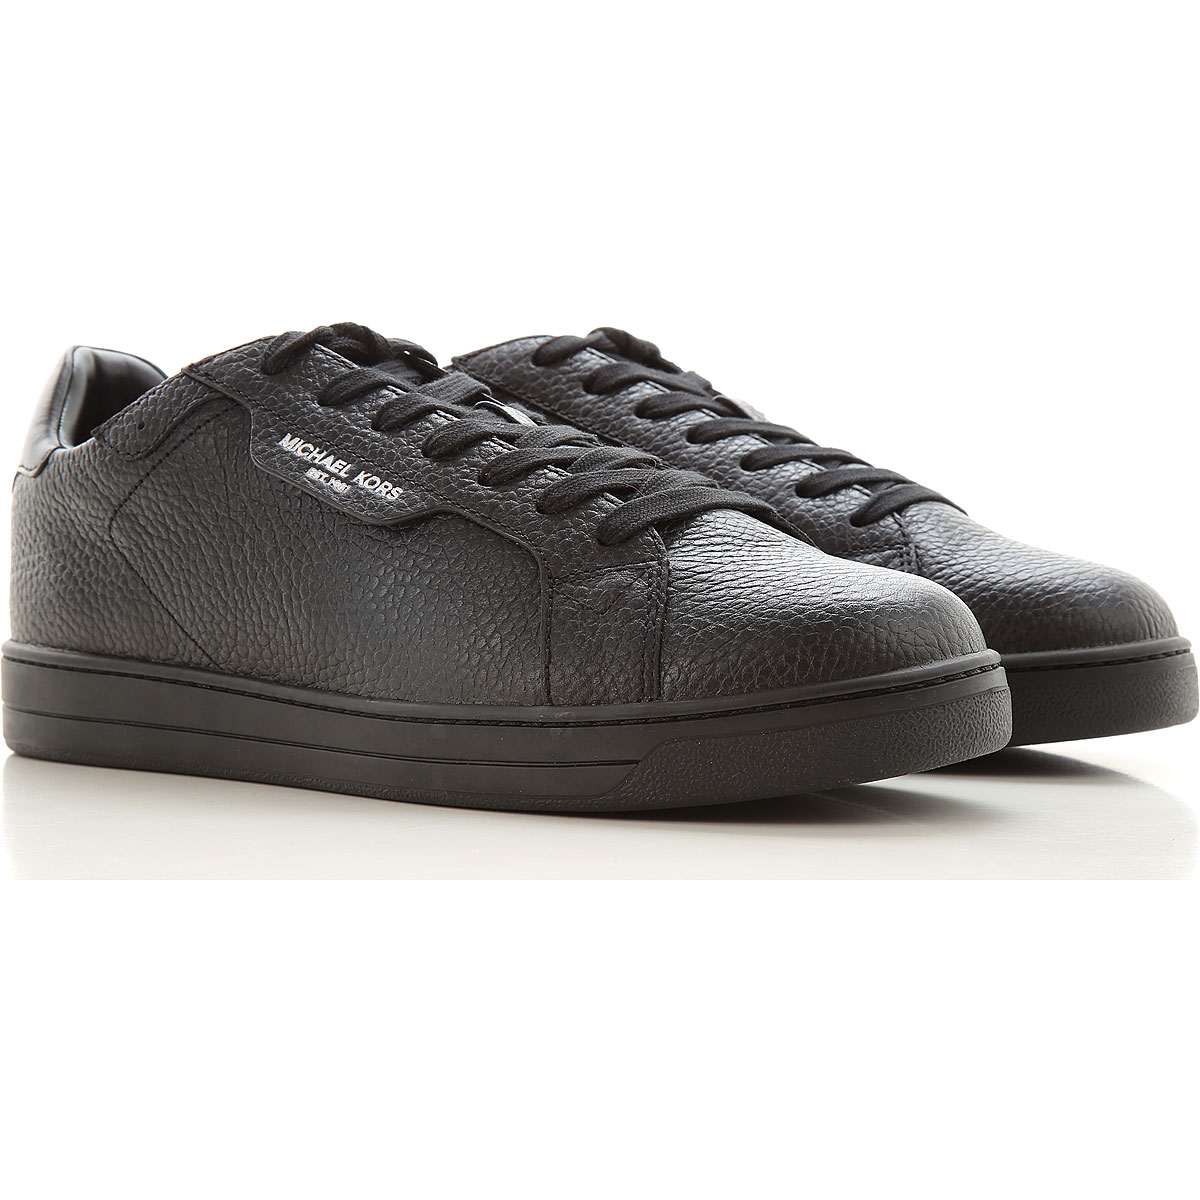 Mens Trainers  Fashion tailored for you  Vilbury London